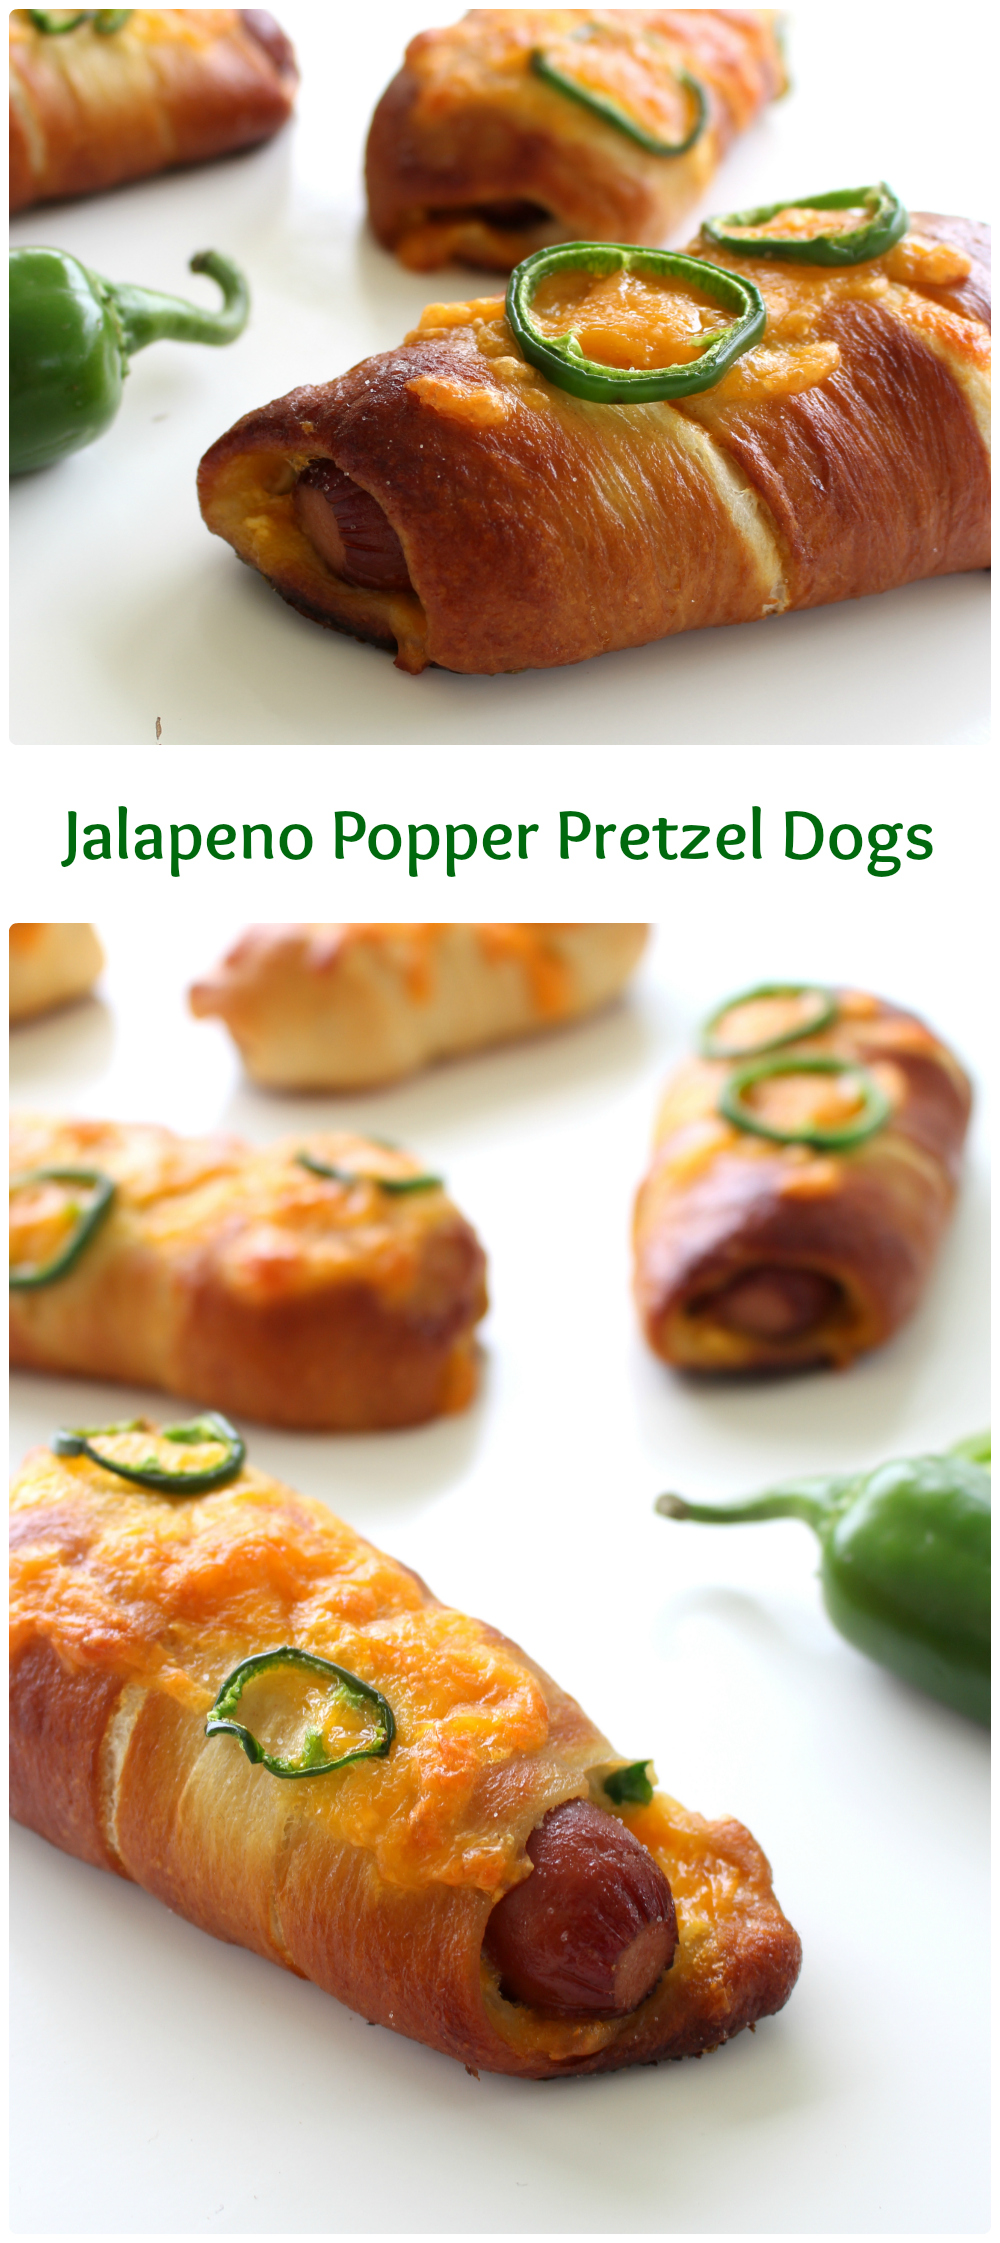 Jalapeno Popper Pretzel Dogs. A hot dog wrapped in soft, chewy pretzel dough stuffed with cheese and jalapenos.